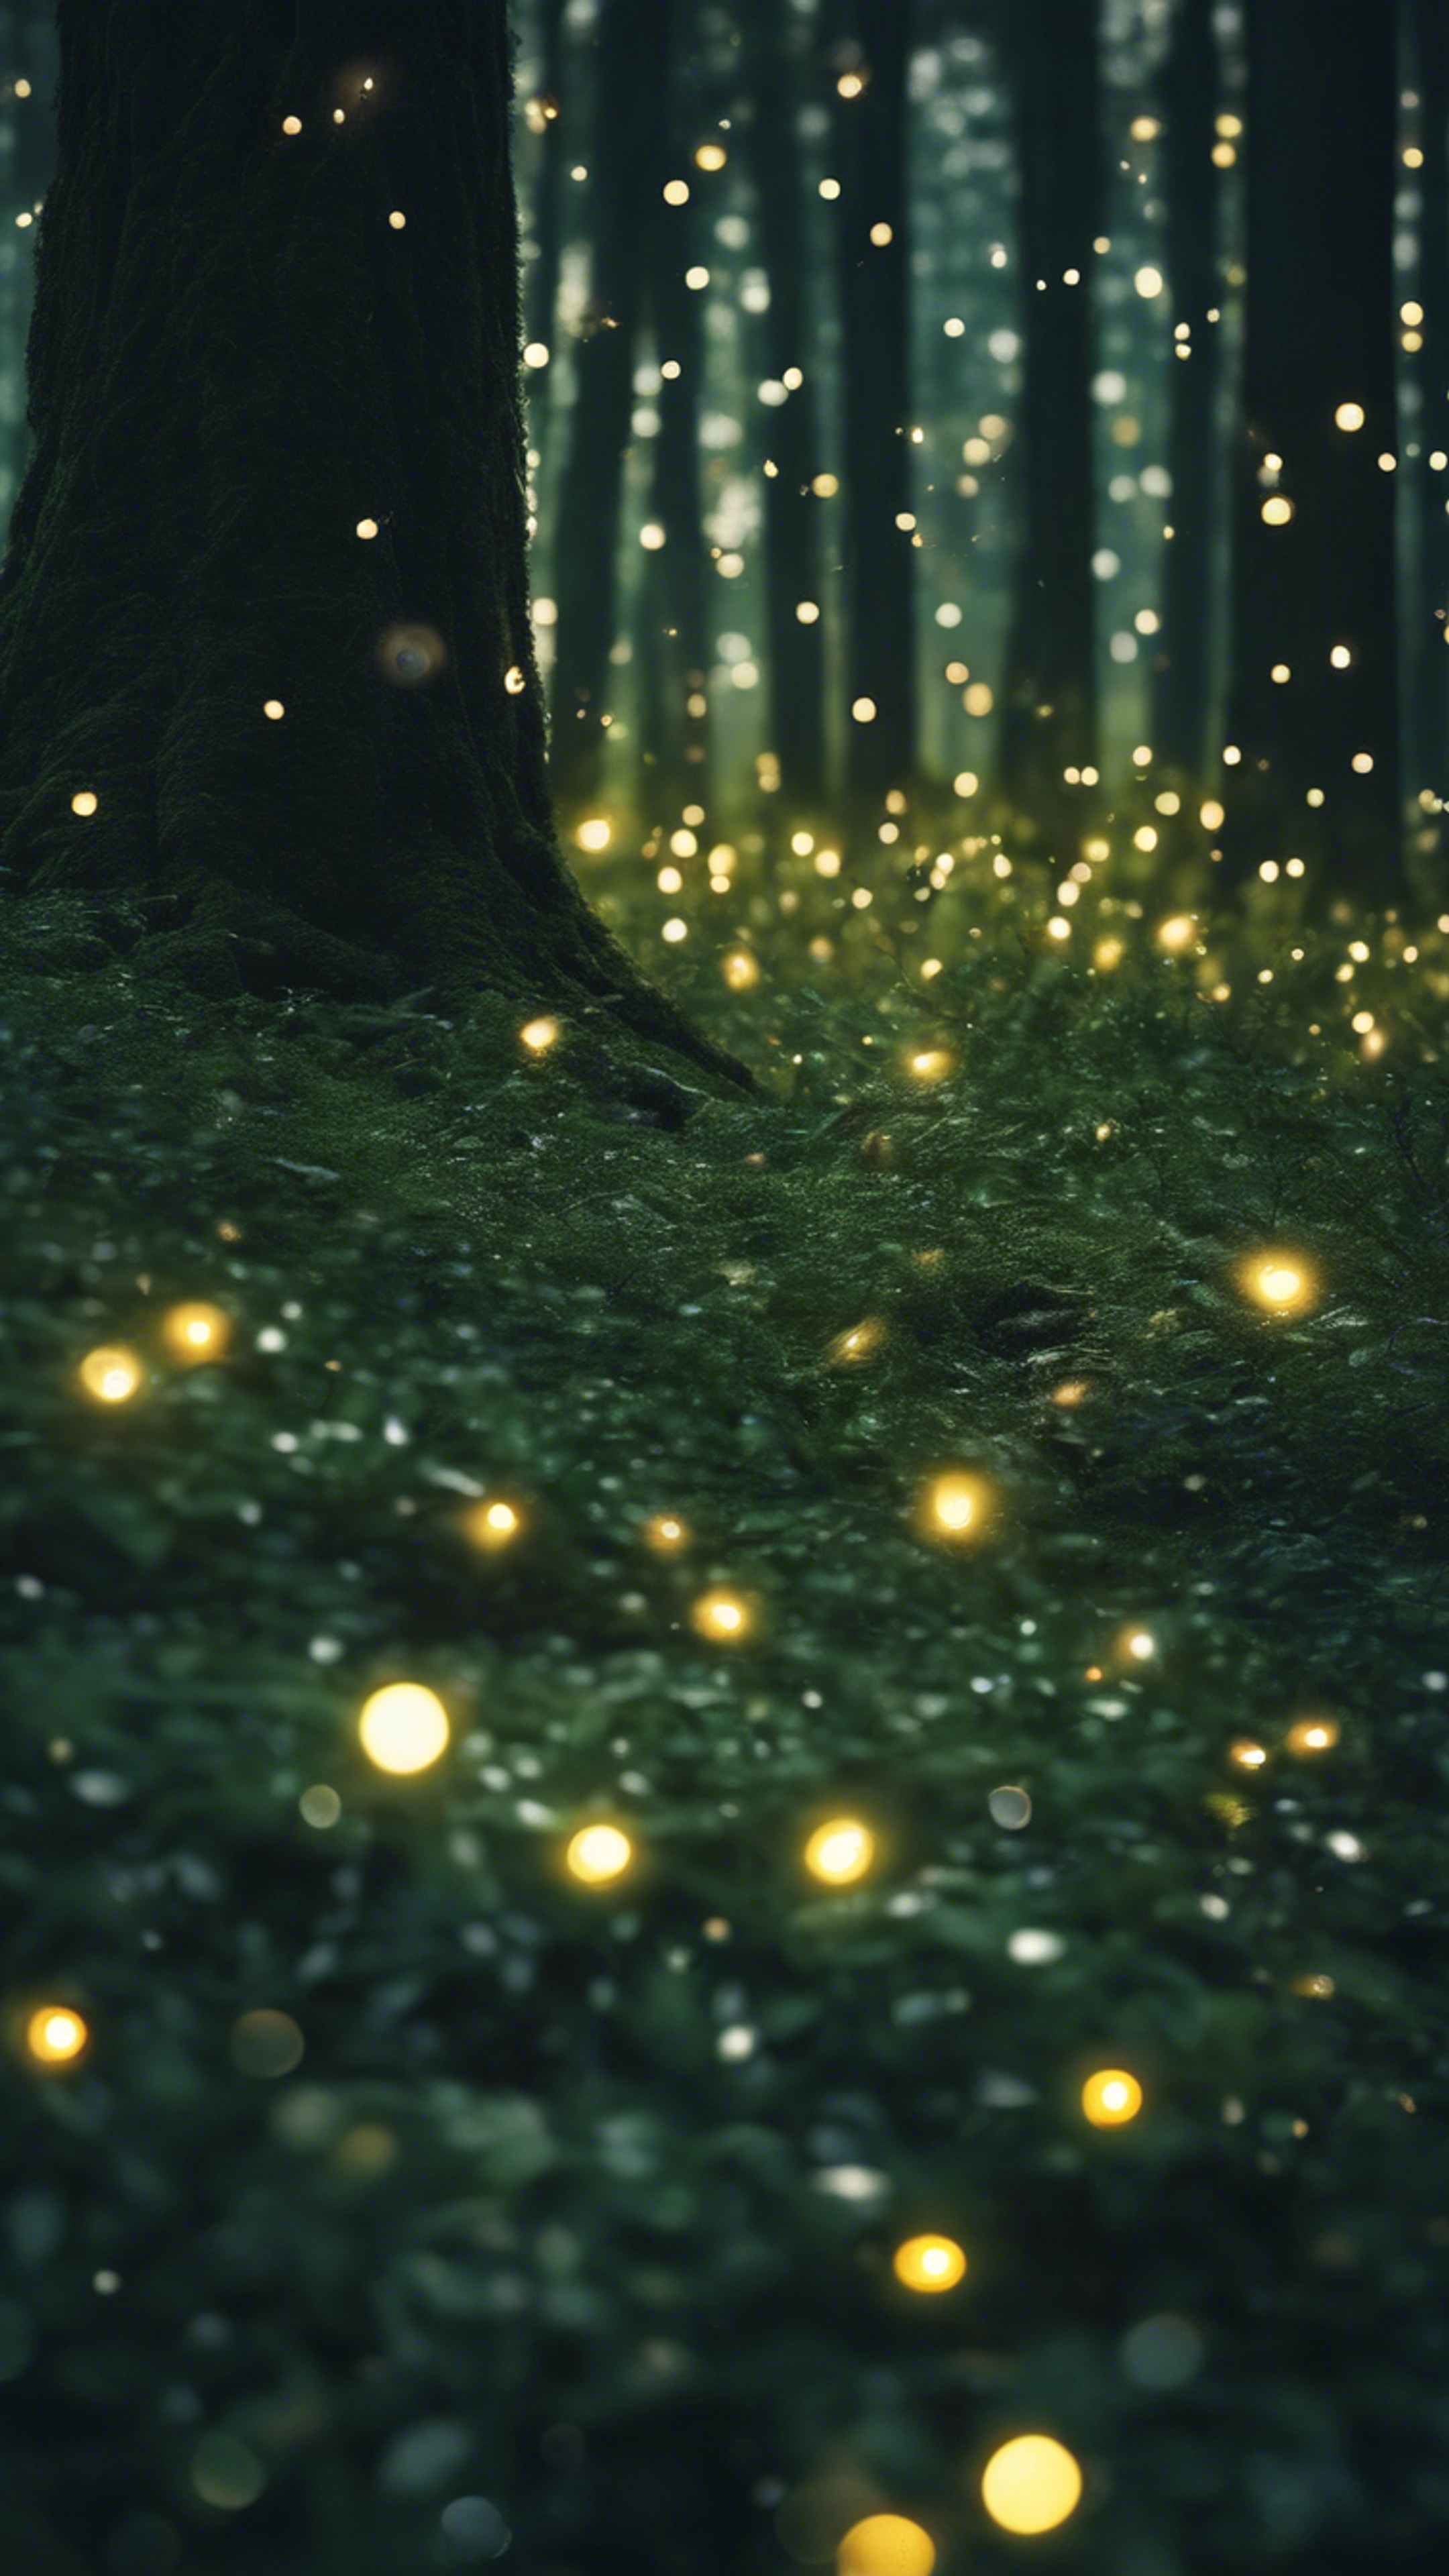 A dark green forest in the twilights, flecked with shimmering fireflies. Tapetai[48f2b28e2b5742fcbebf]